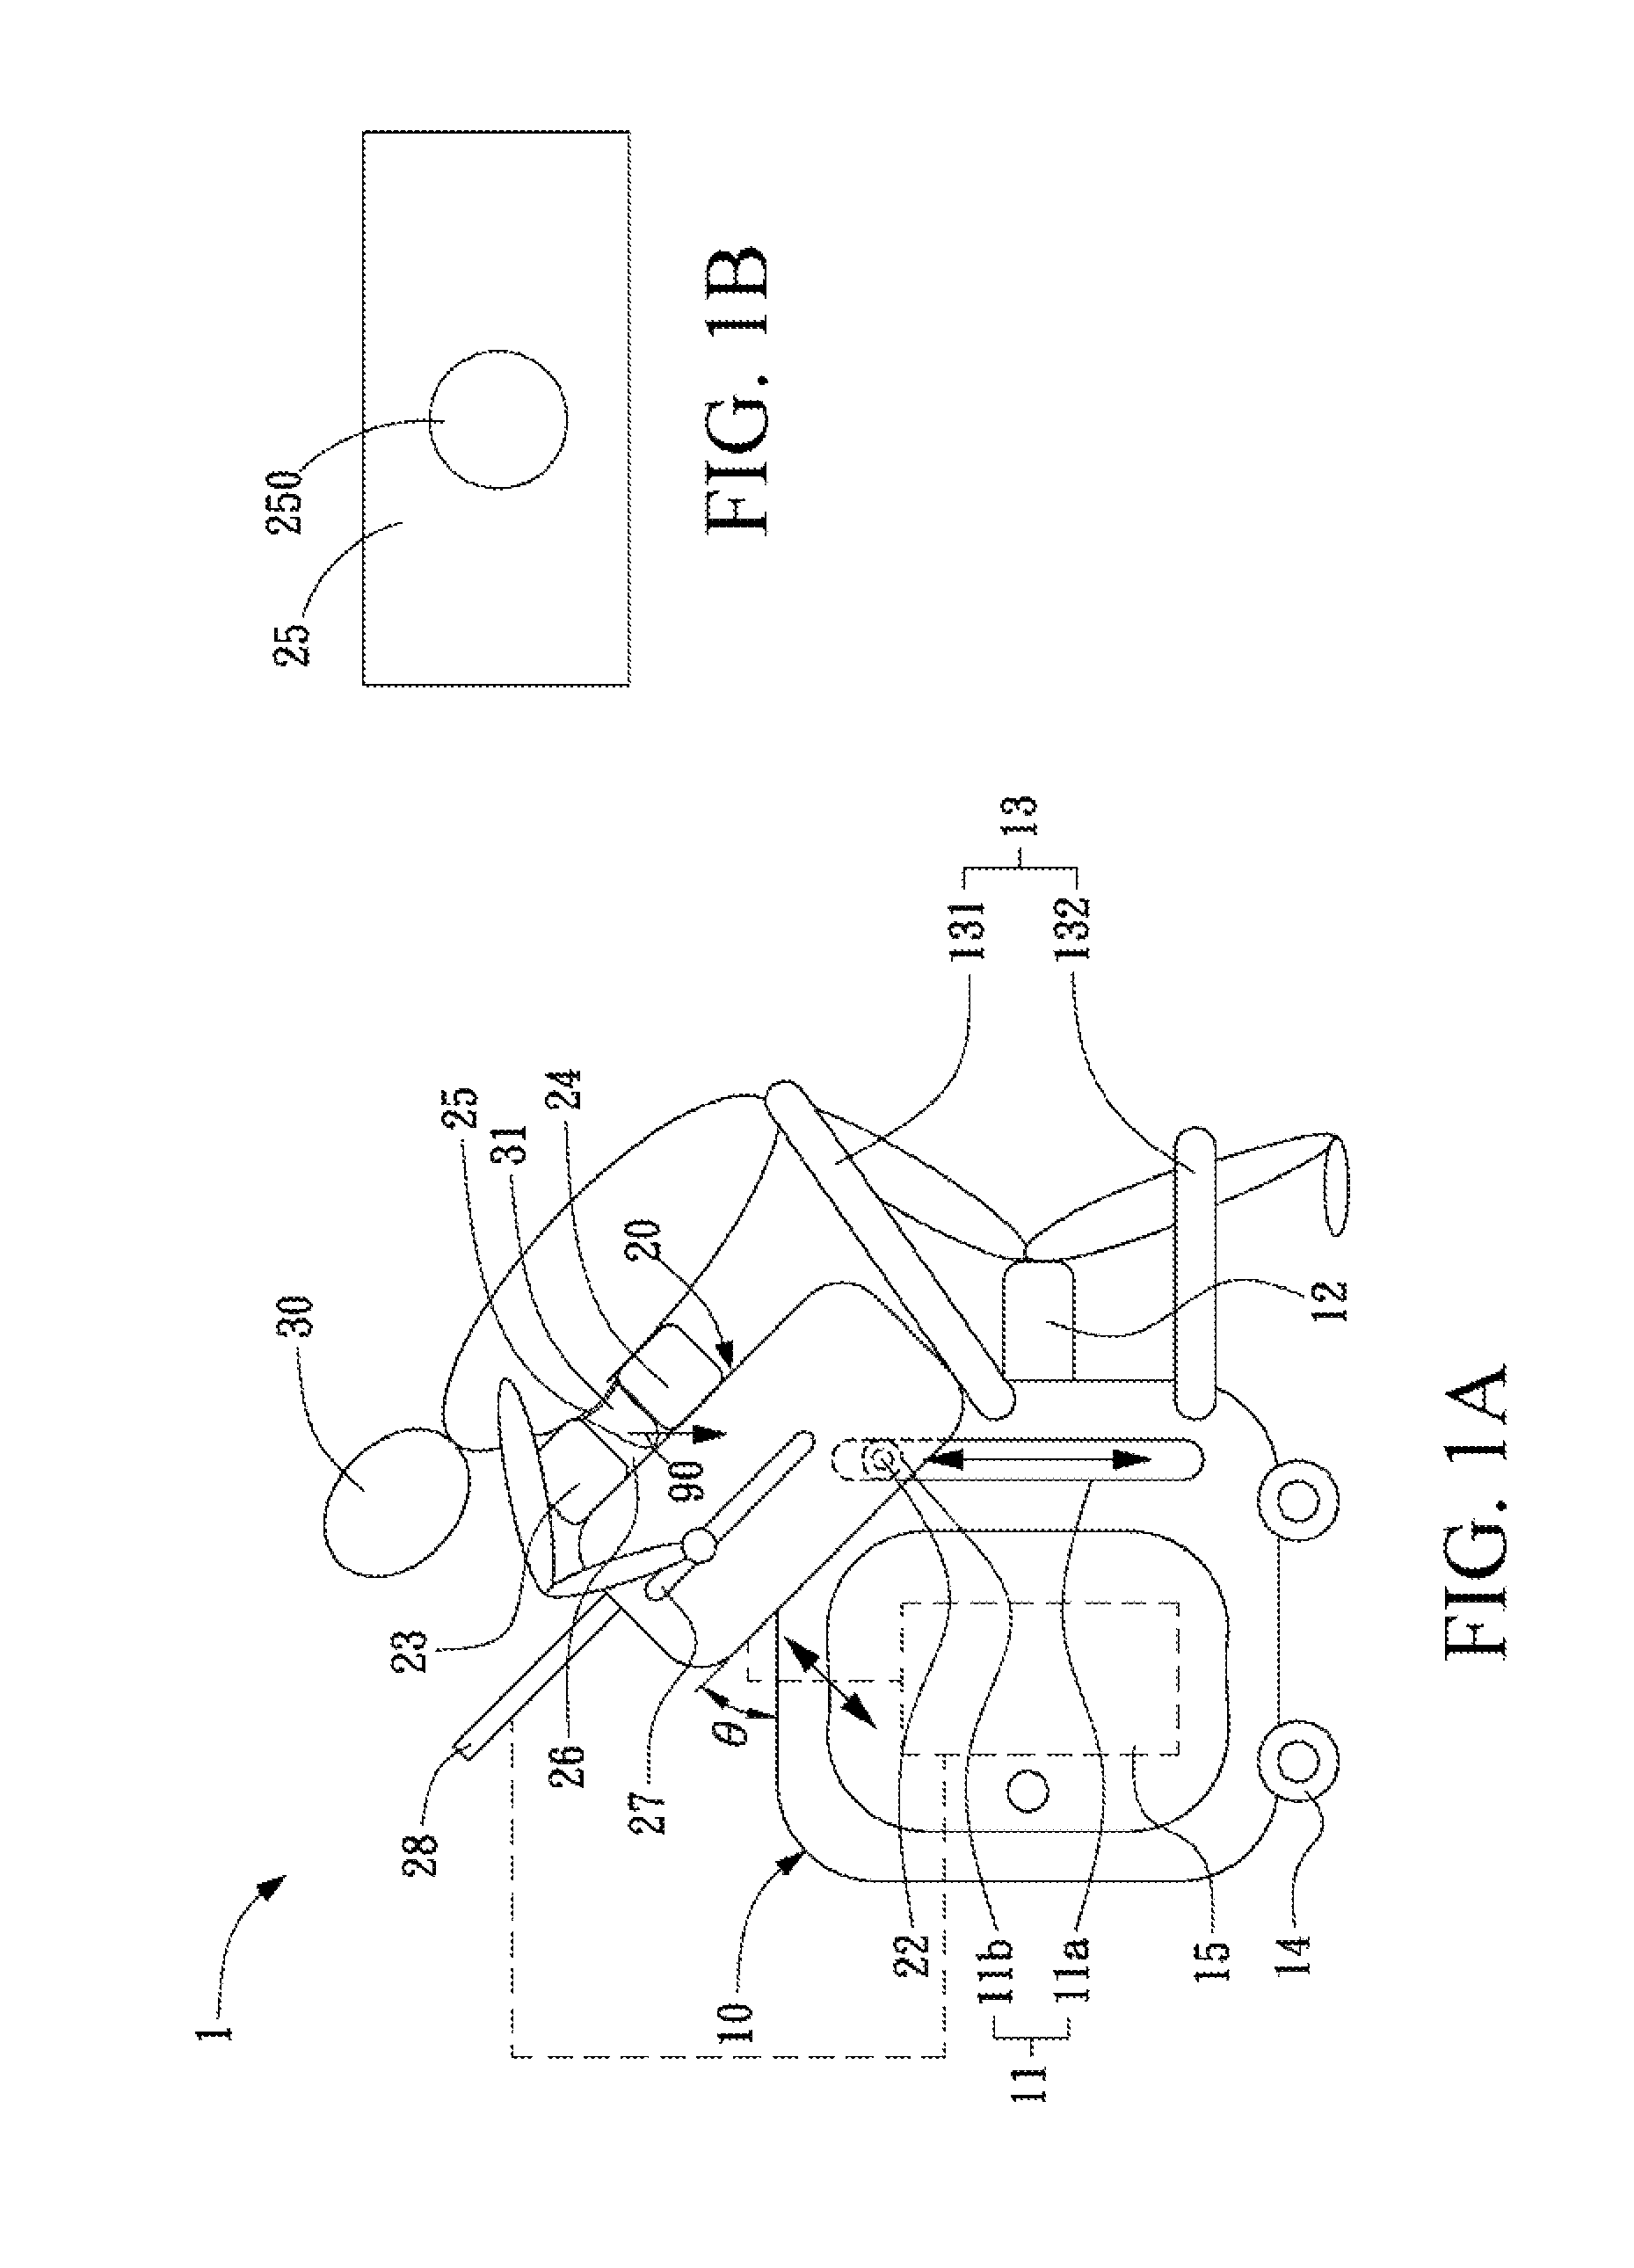 Medical inspection apparatus